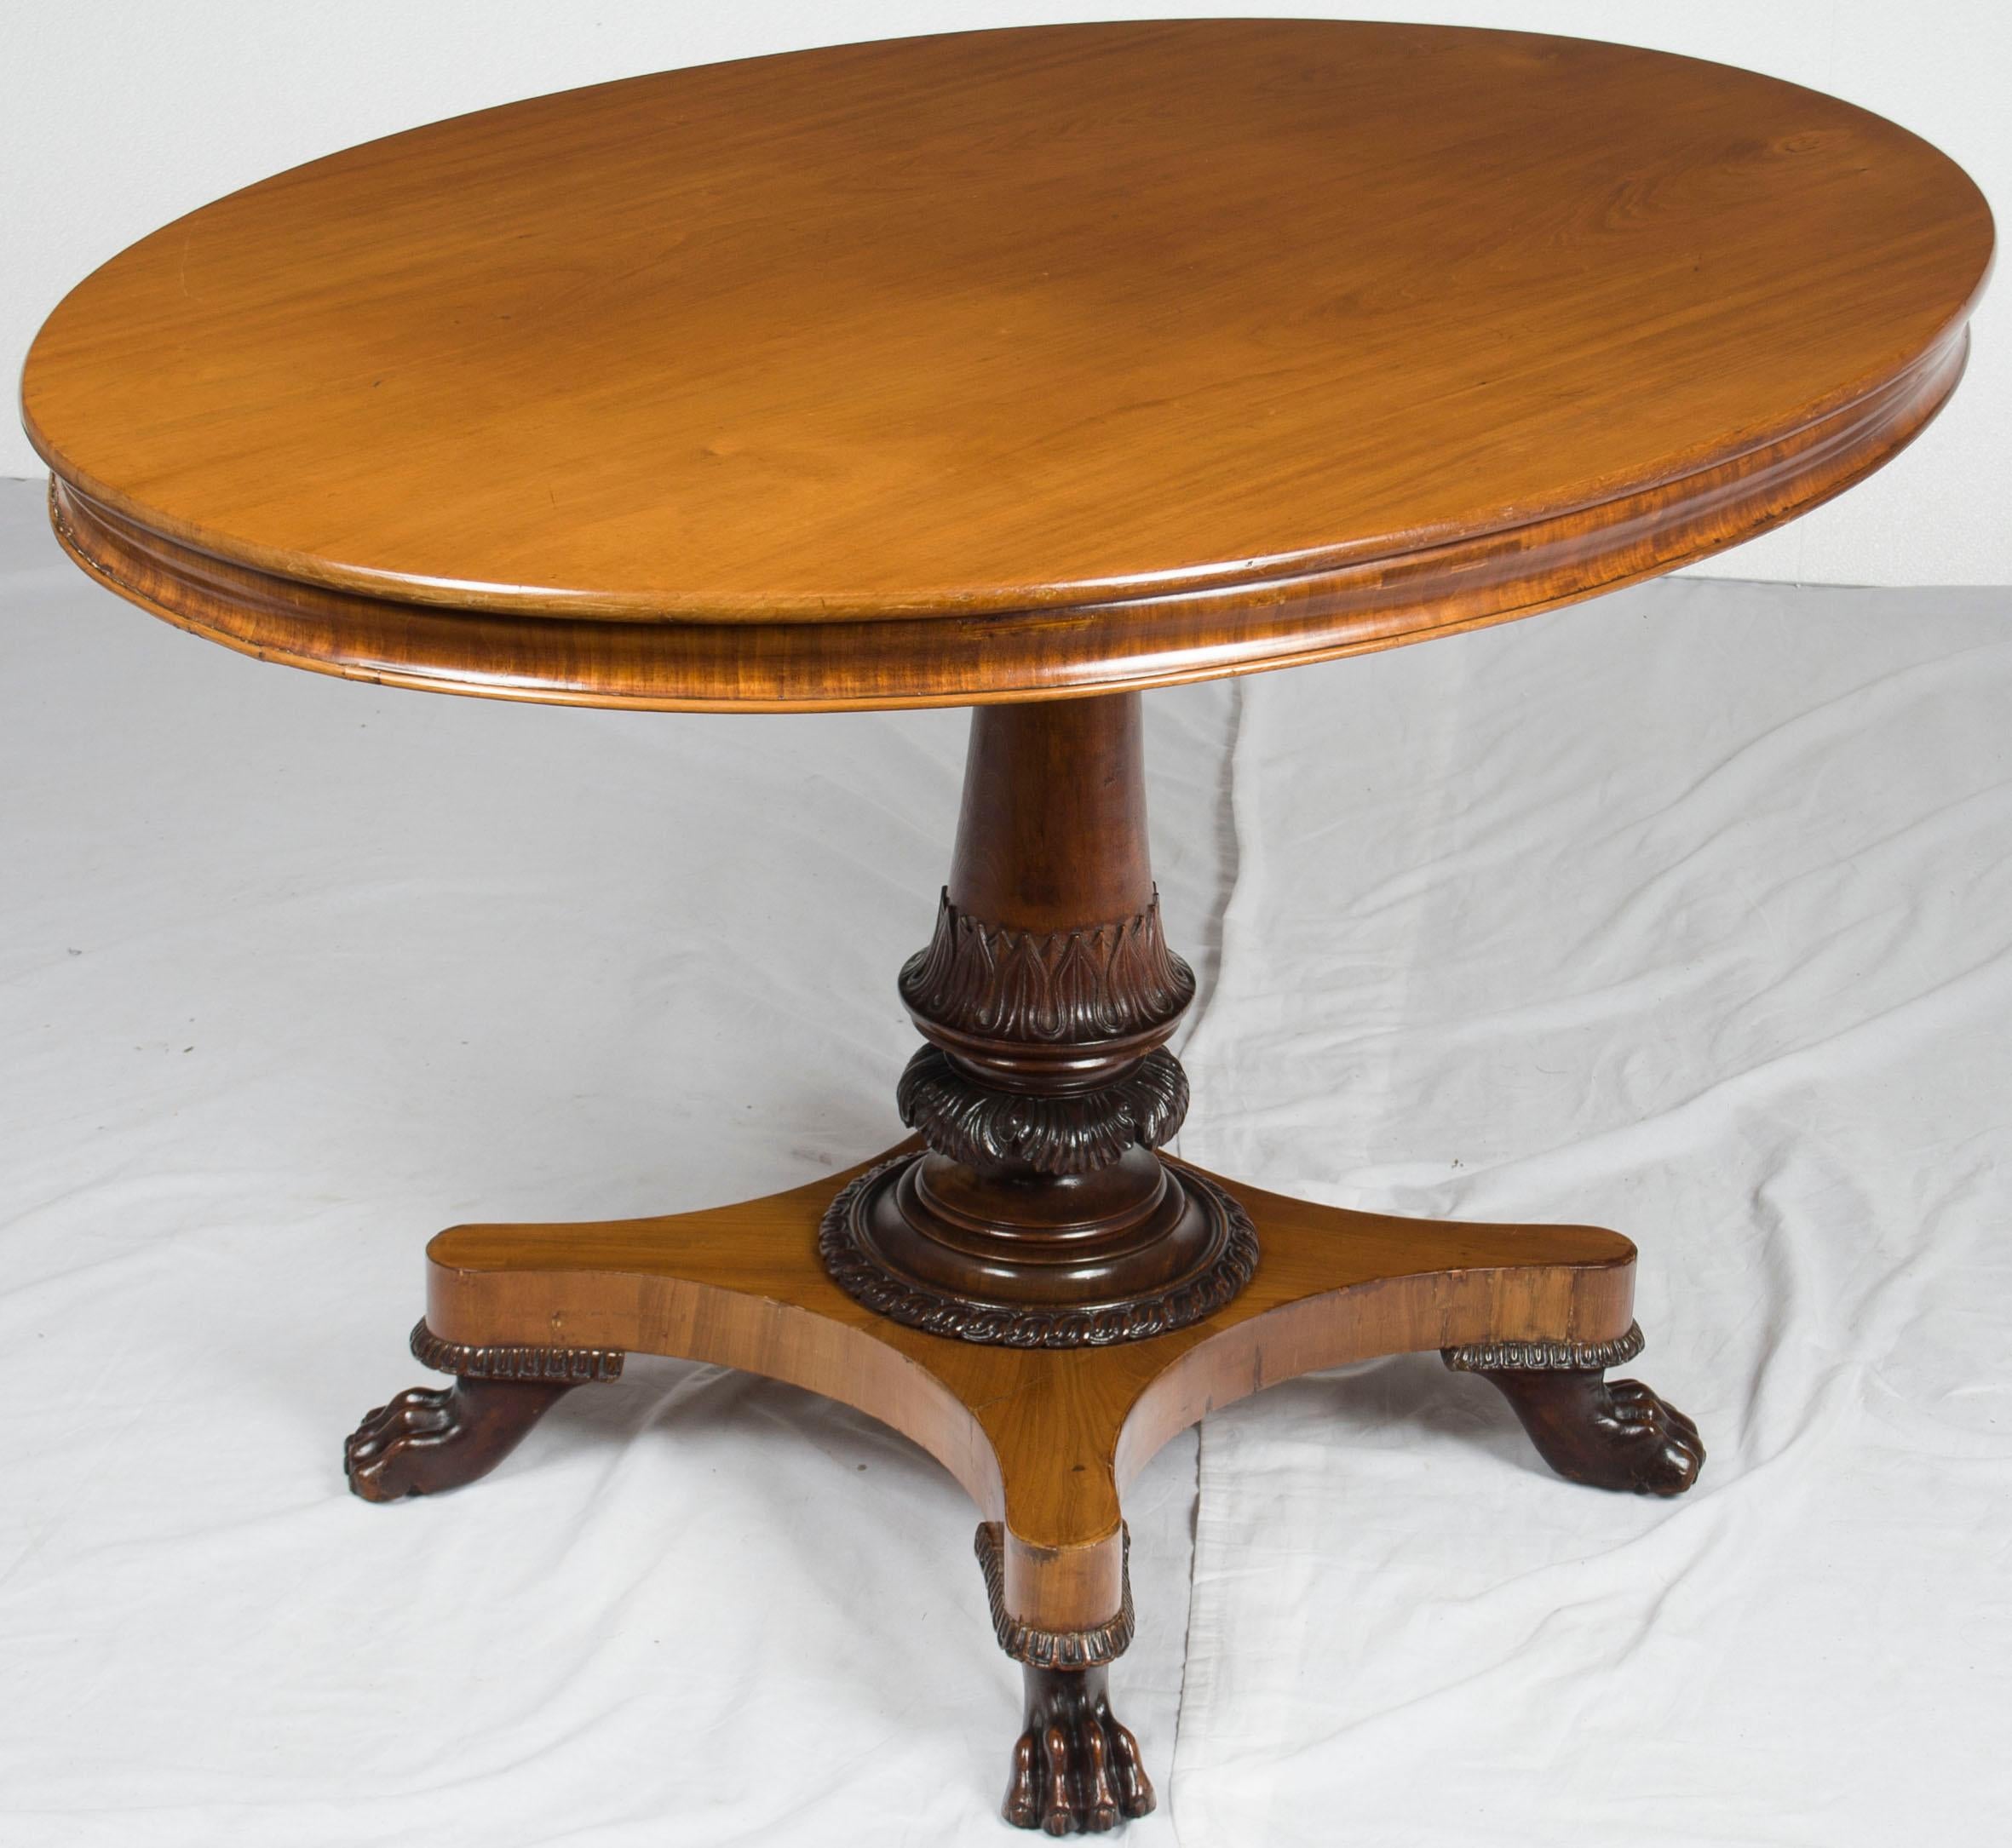 Mahogany and Oak Empire Style Large Oval Center Foyer Table Claw Foot Pedestal In Fair Condition For Sale In Atlanta, GA